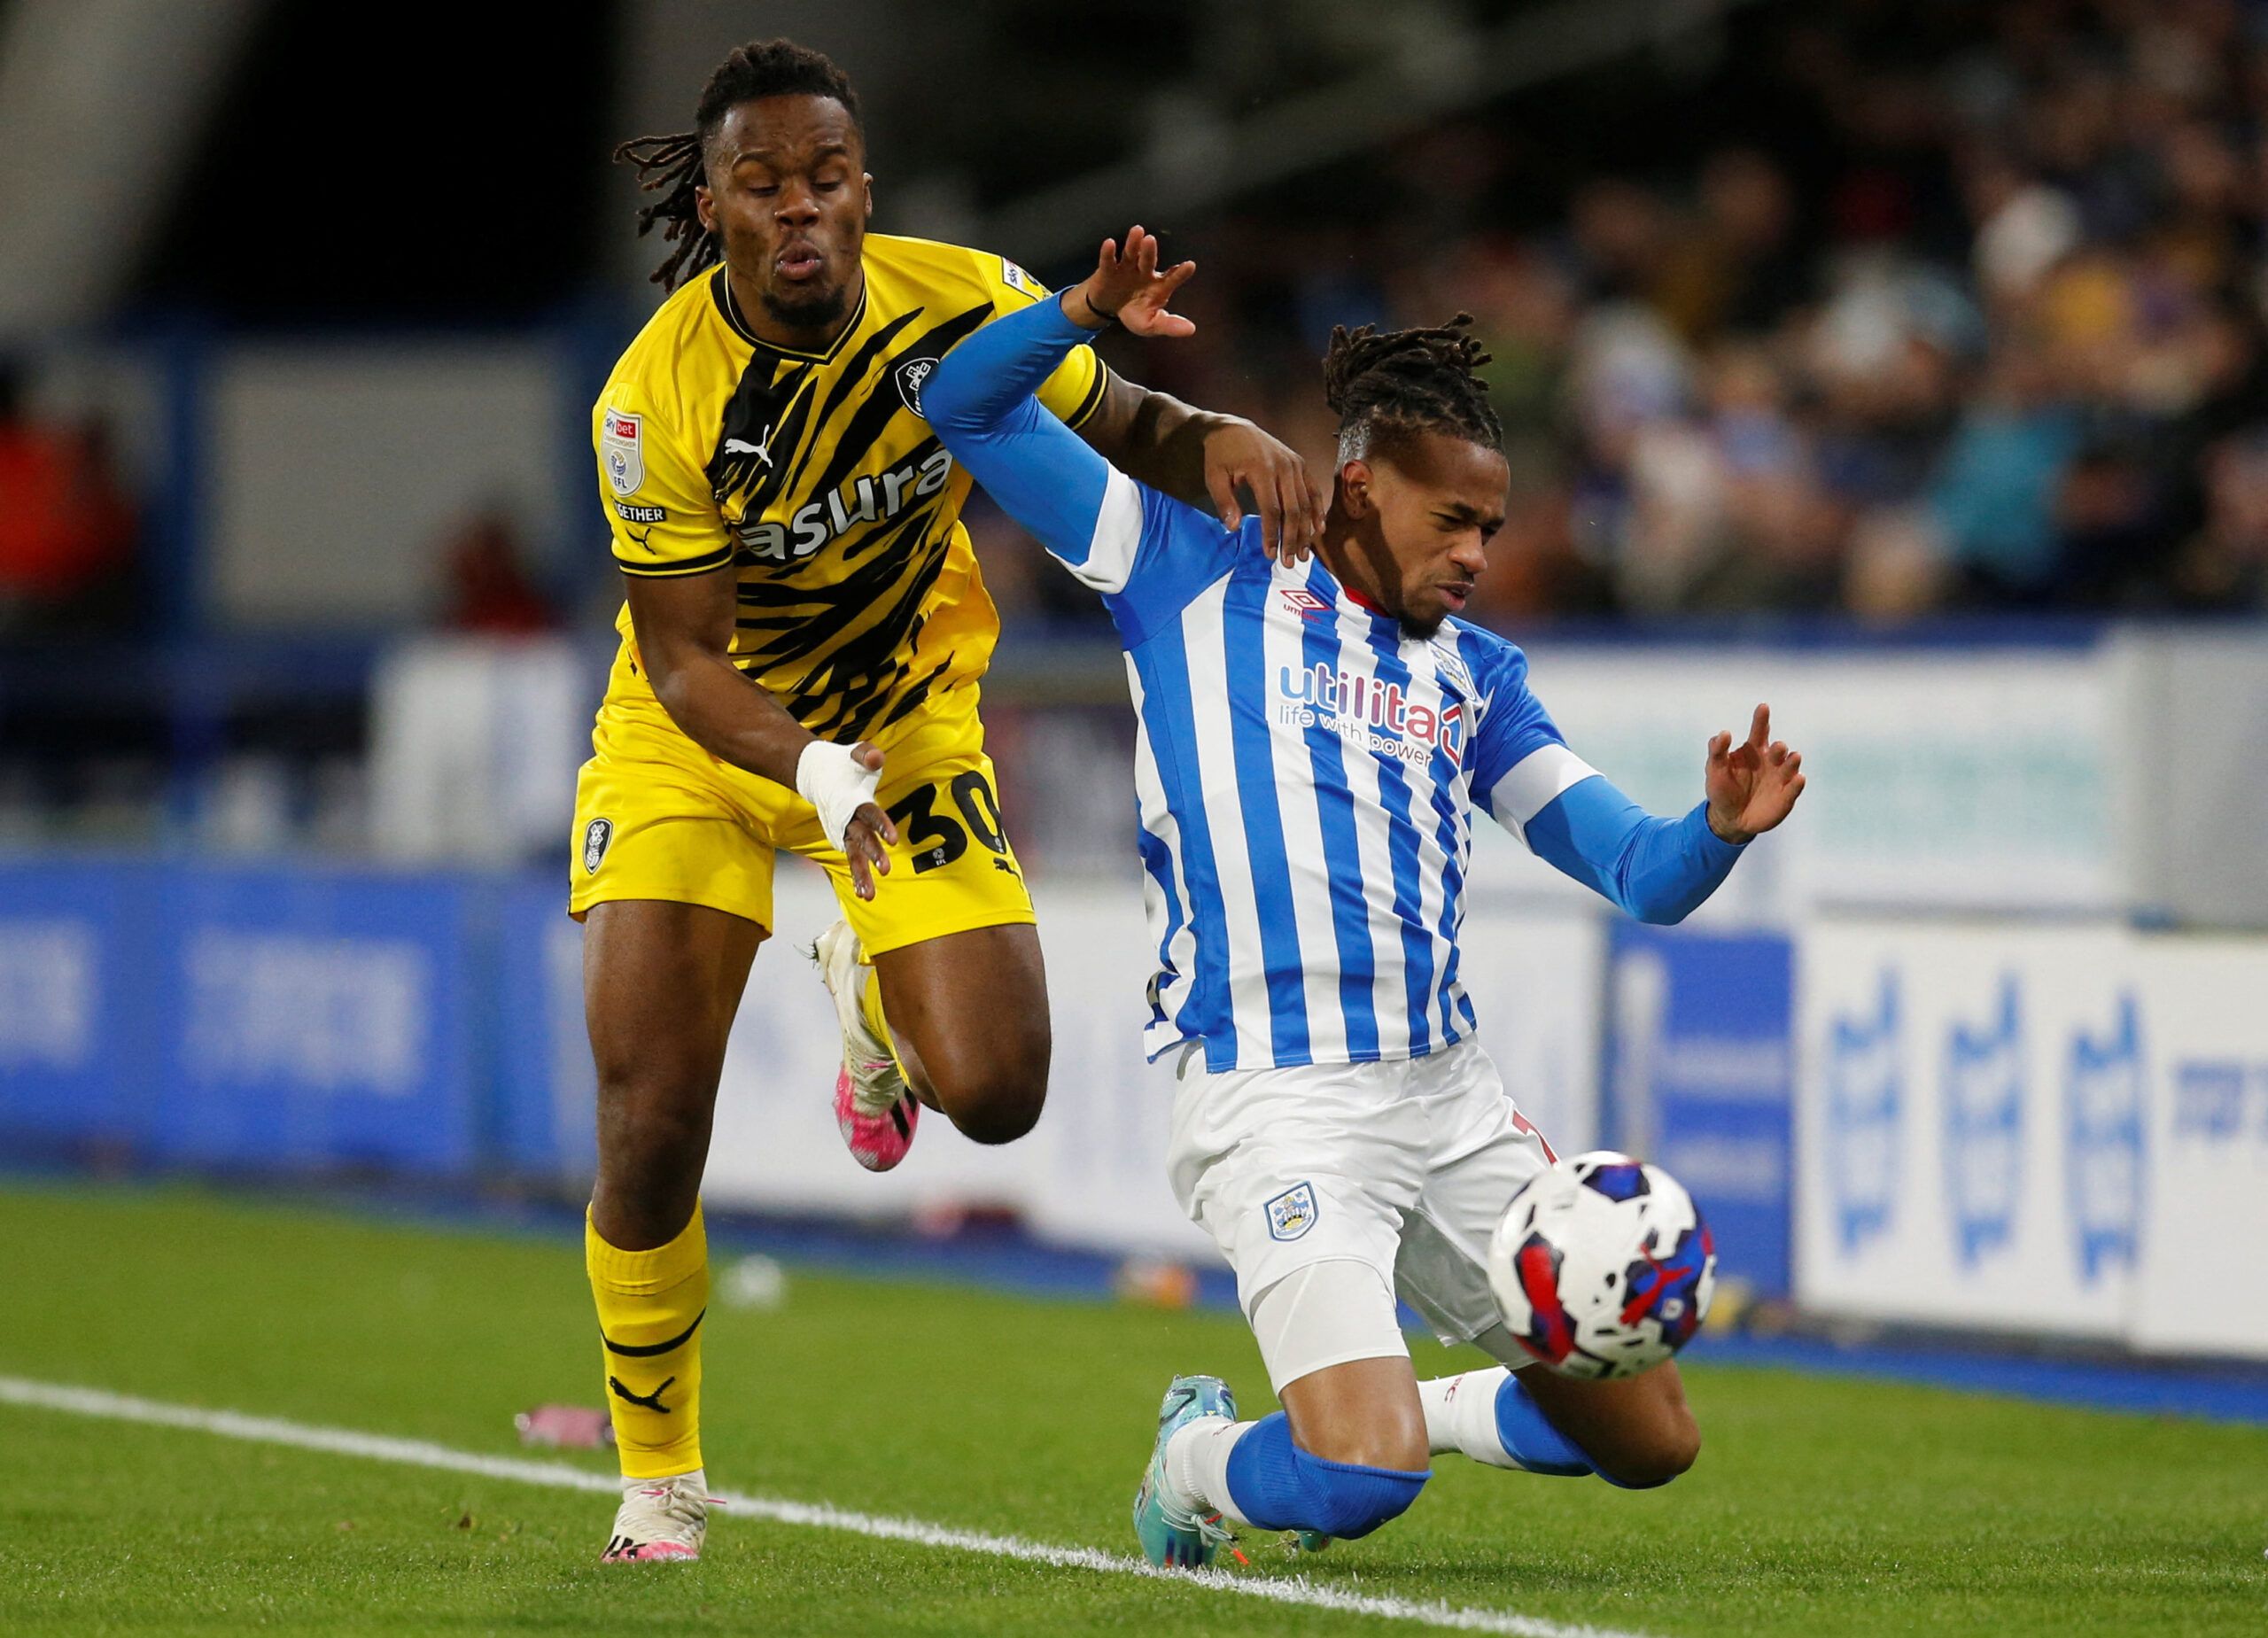 Soccer Football - Championship -  Huddersfield Town v Rotherham United - John Smith's Stadium, Huddersfield, Britain - December 29, 2022 Rotherham United's Peter Kioso in action with Huddersfield Town's David Kasumu Action Images/Ed Sykes  EDITORIAL USE ONLY. No use with unauthorized audio, video, data, fixture lists, club/league logos or 